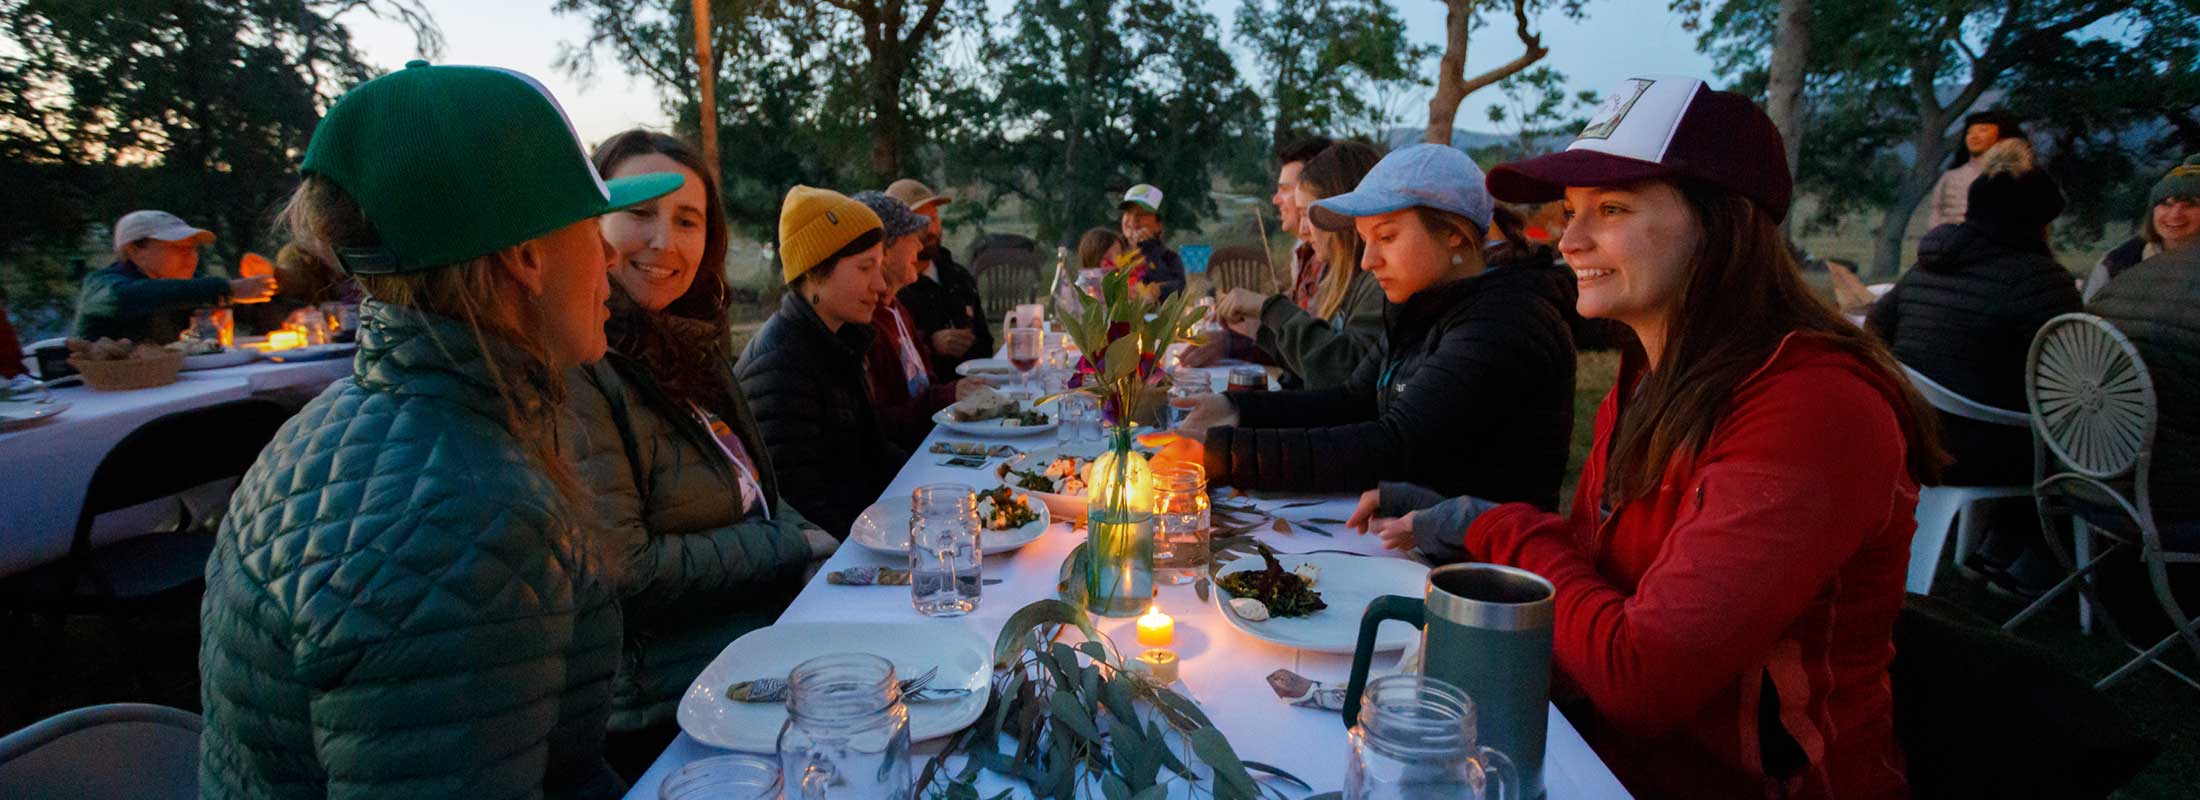 A group of friends gather around an outdoor table for a holiday dinner party